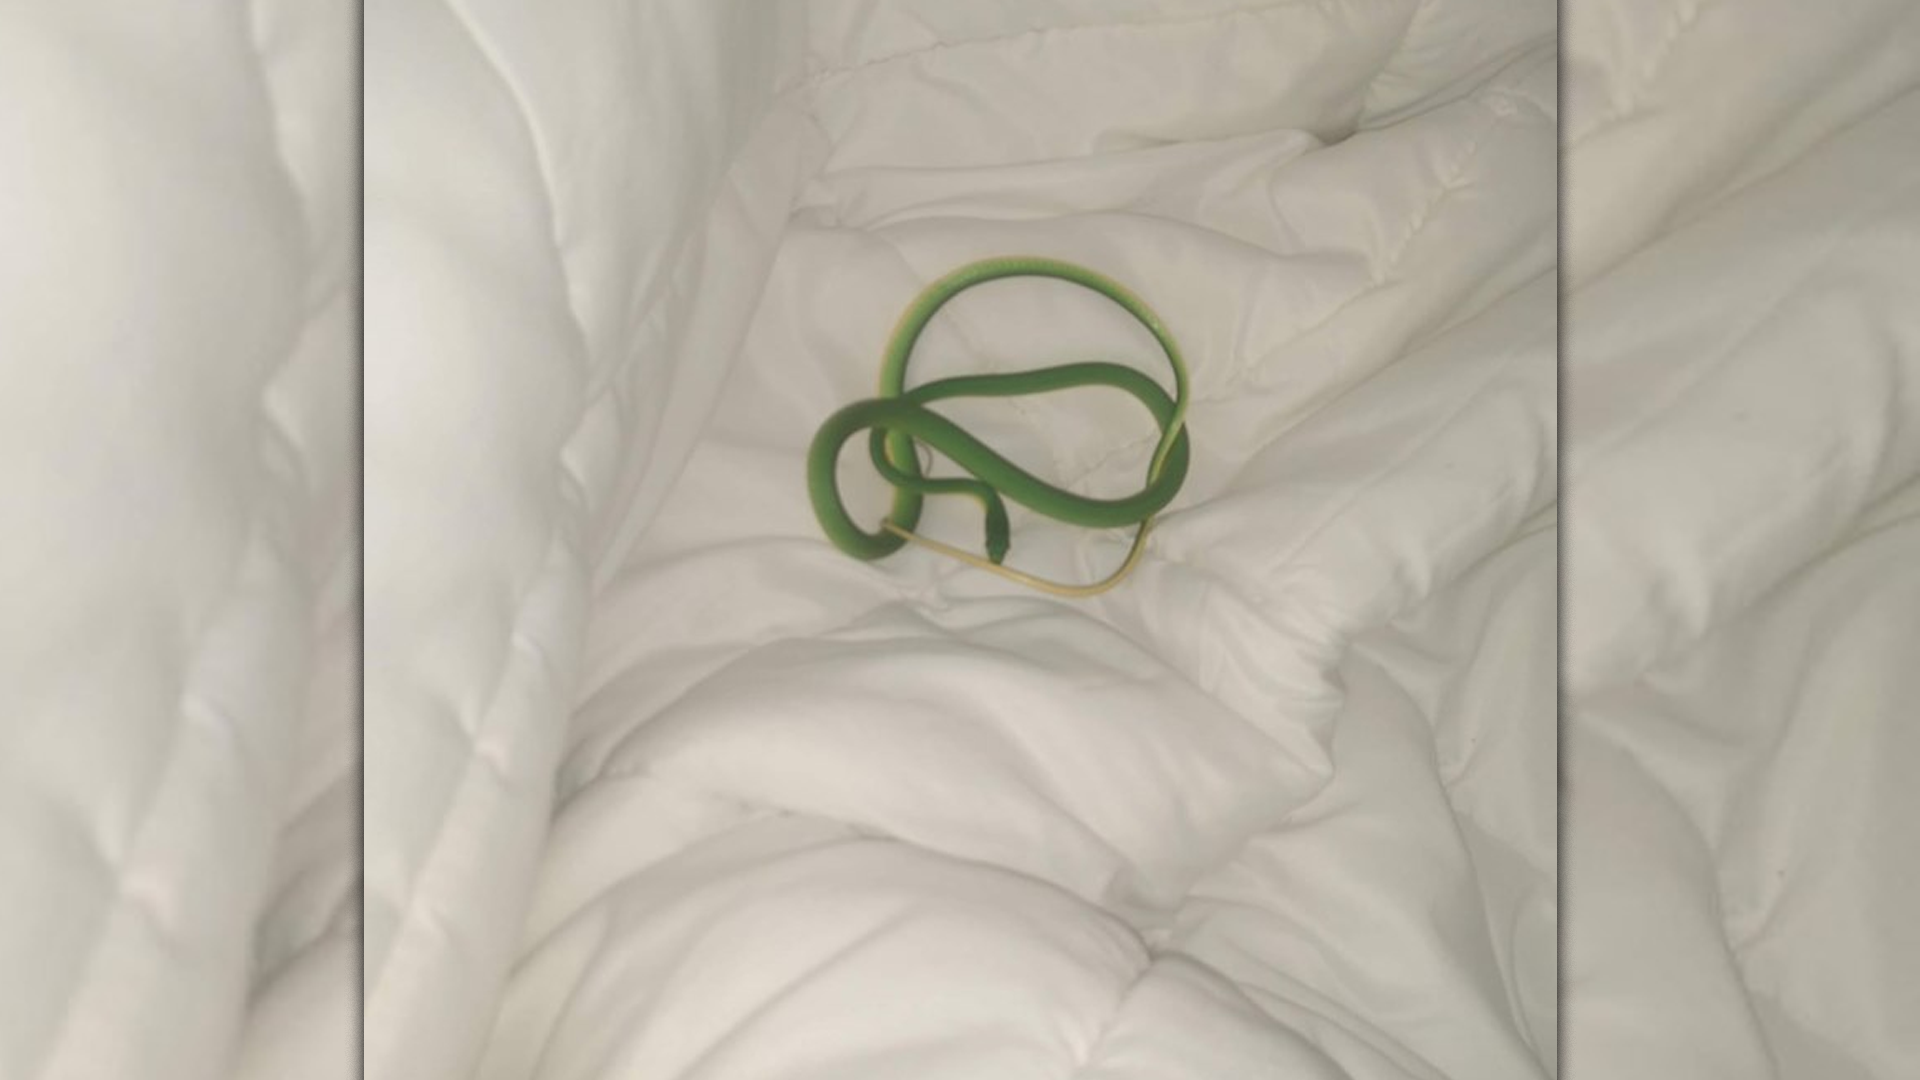 Woman in Hotel Wakes to Find Snake on Her Arm - Thumbnail Image